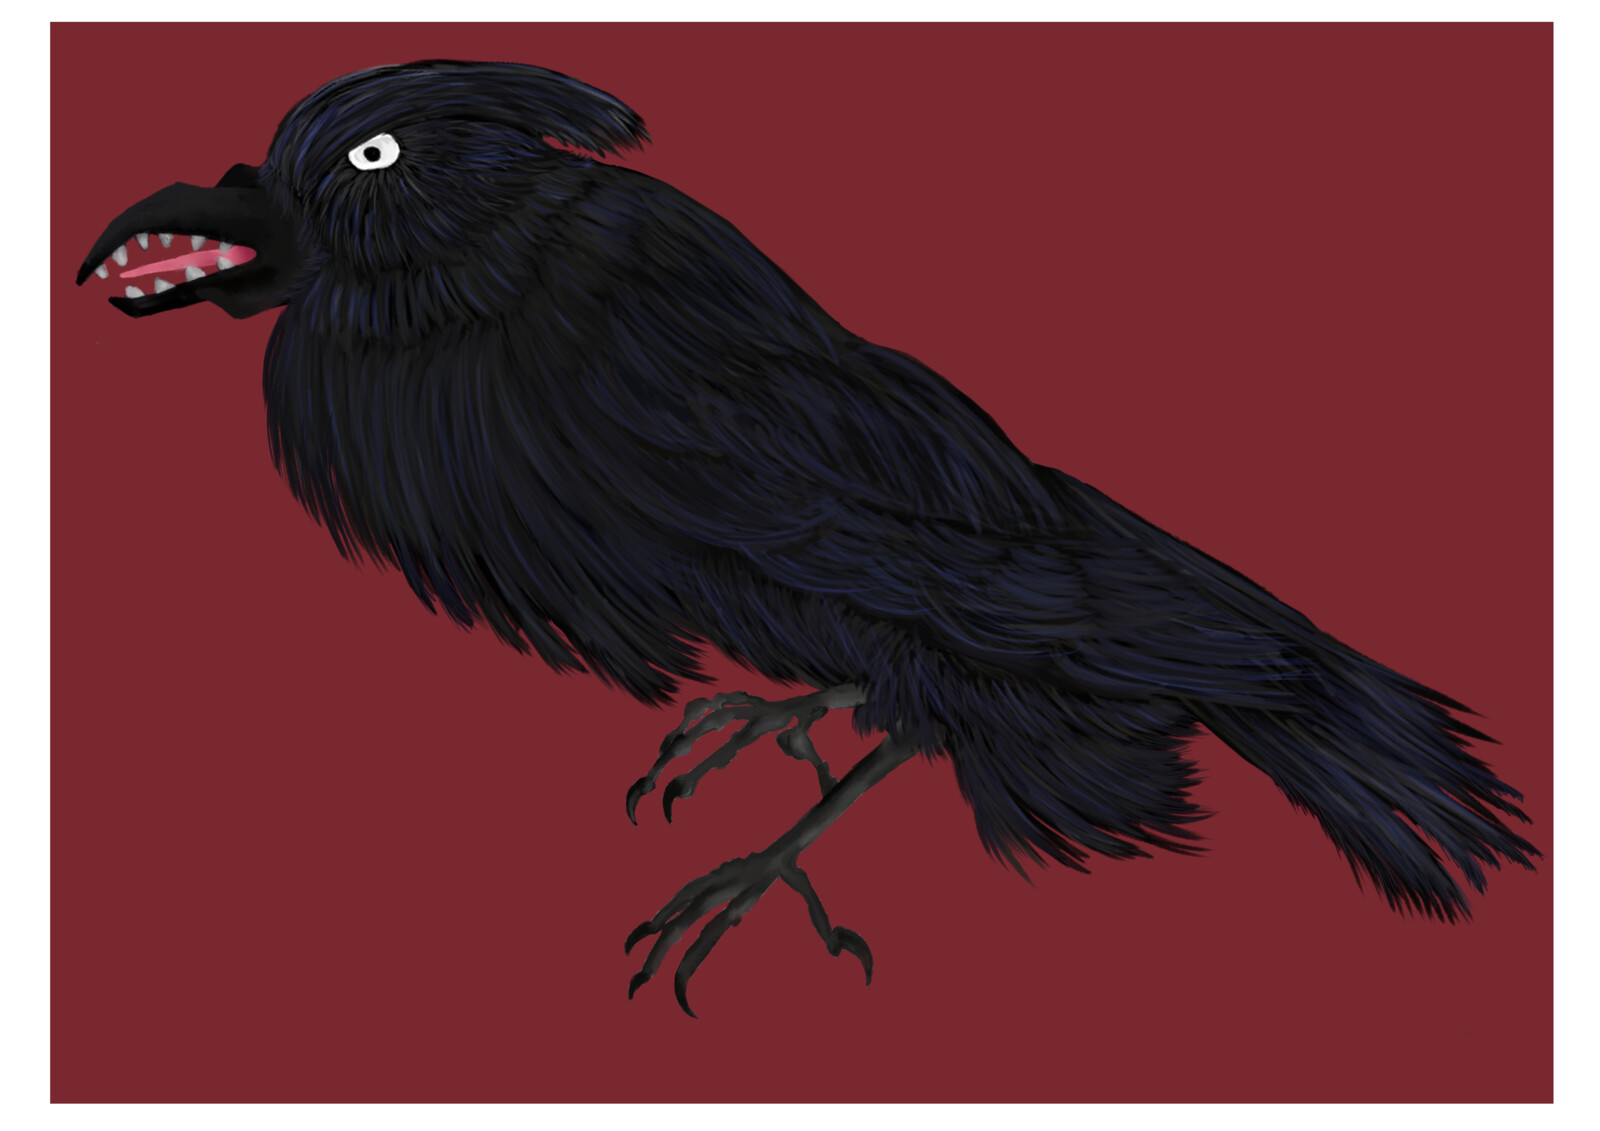 Final raven design, as decided by team